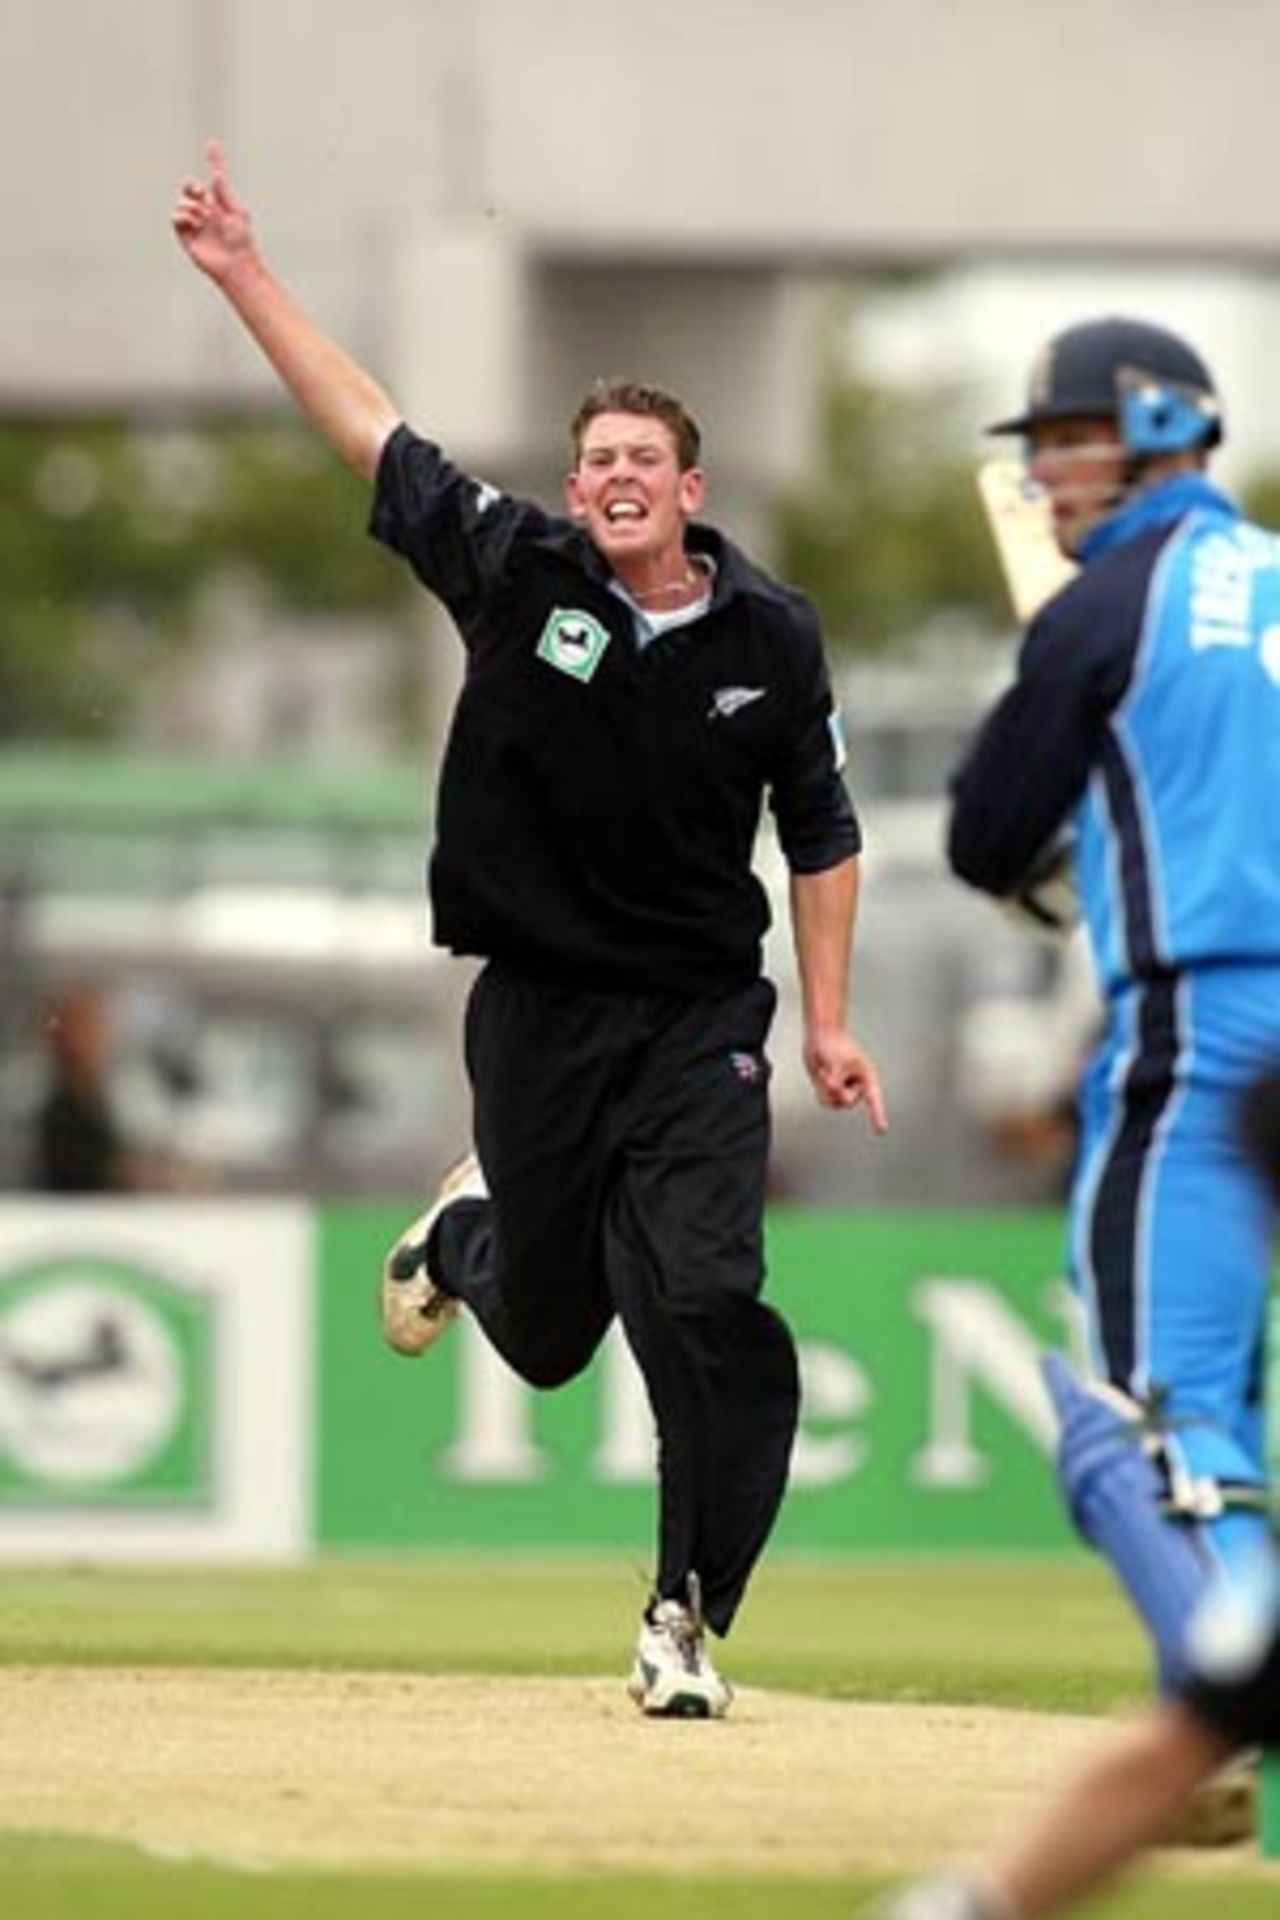 Debutant New Zealand bowler Ian Butler celebrates the dismissal of England batsman Marcus Trescothick, lbw for one. The wicket was taken on Butler's fifth ball in One-Day Internationals. Butler took 1-37 from five overs. 1st ODI: New Zealand v England at Jade Stadium, Christchurch, 13 February 2002.